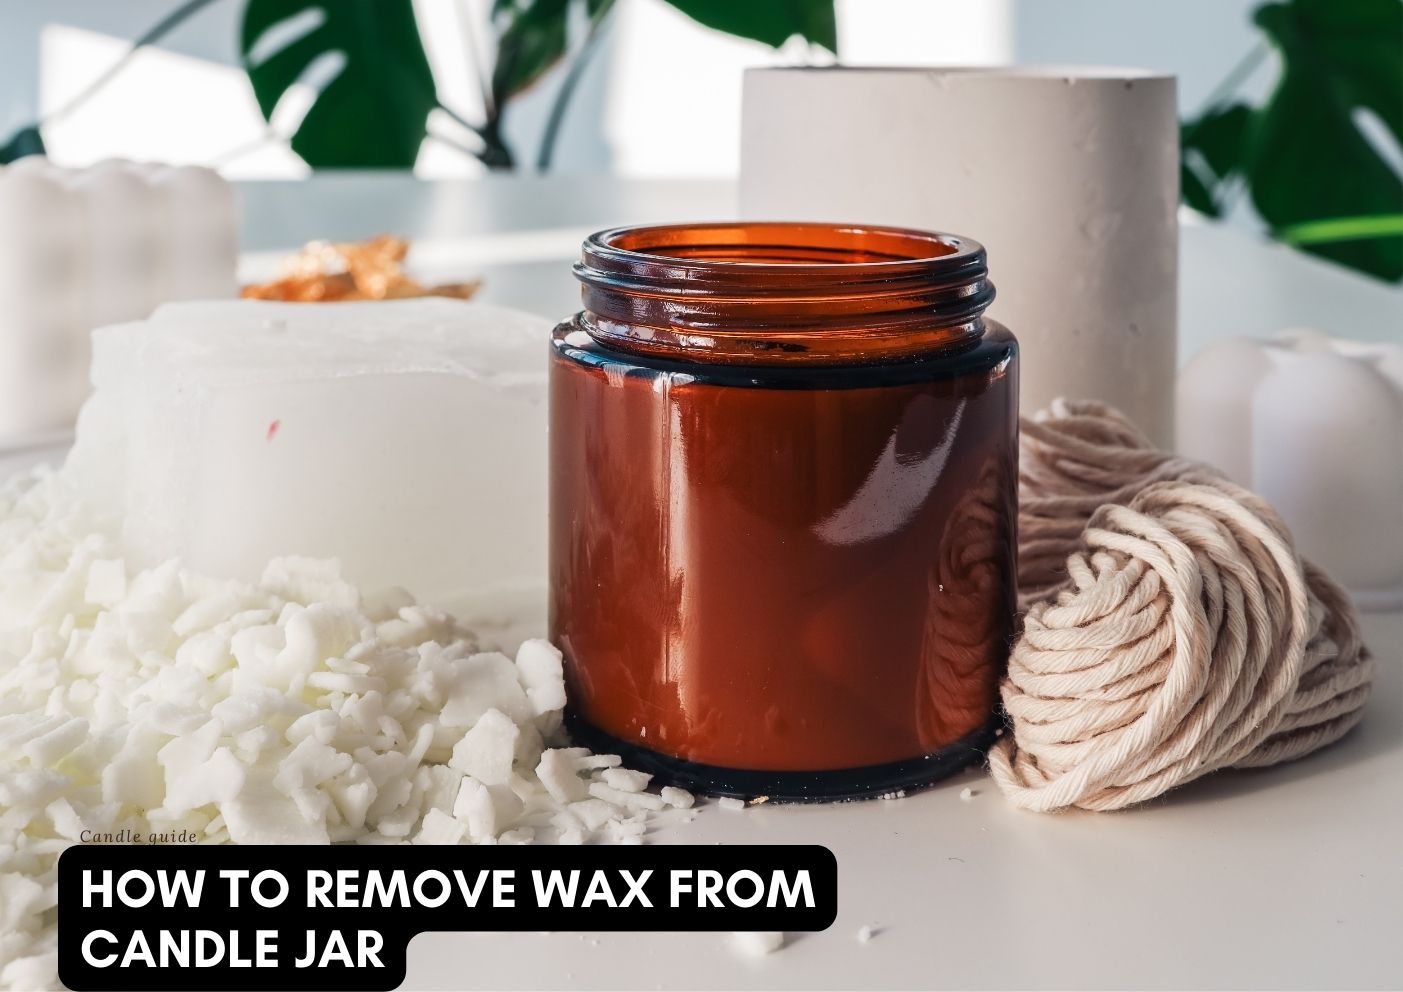 How to remove wax from candle jar